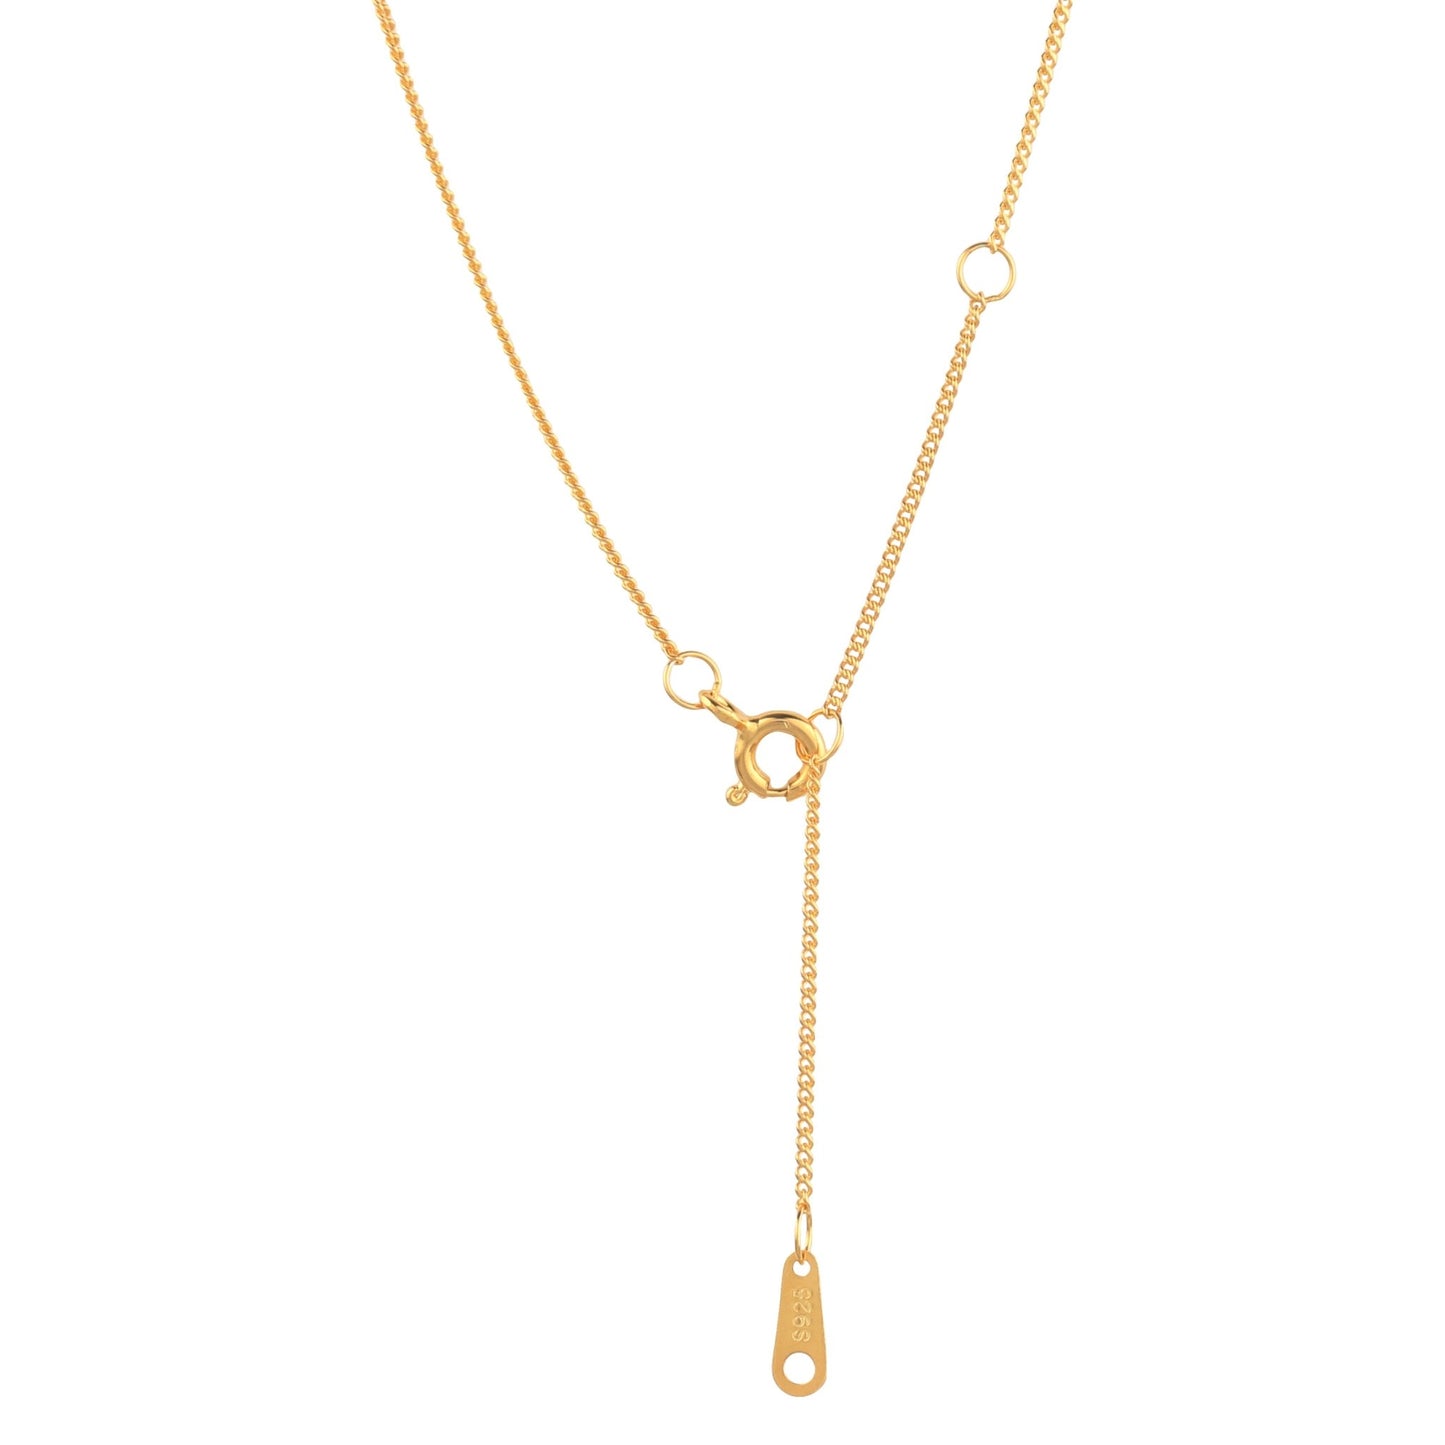 14K Gold Plated Two Circle Interlocking Pendant Necklace - JuVons